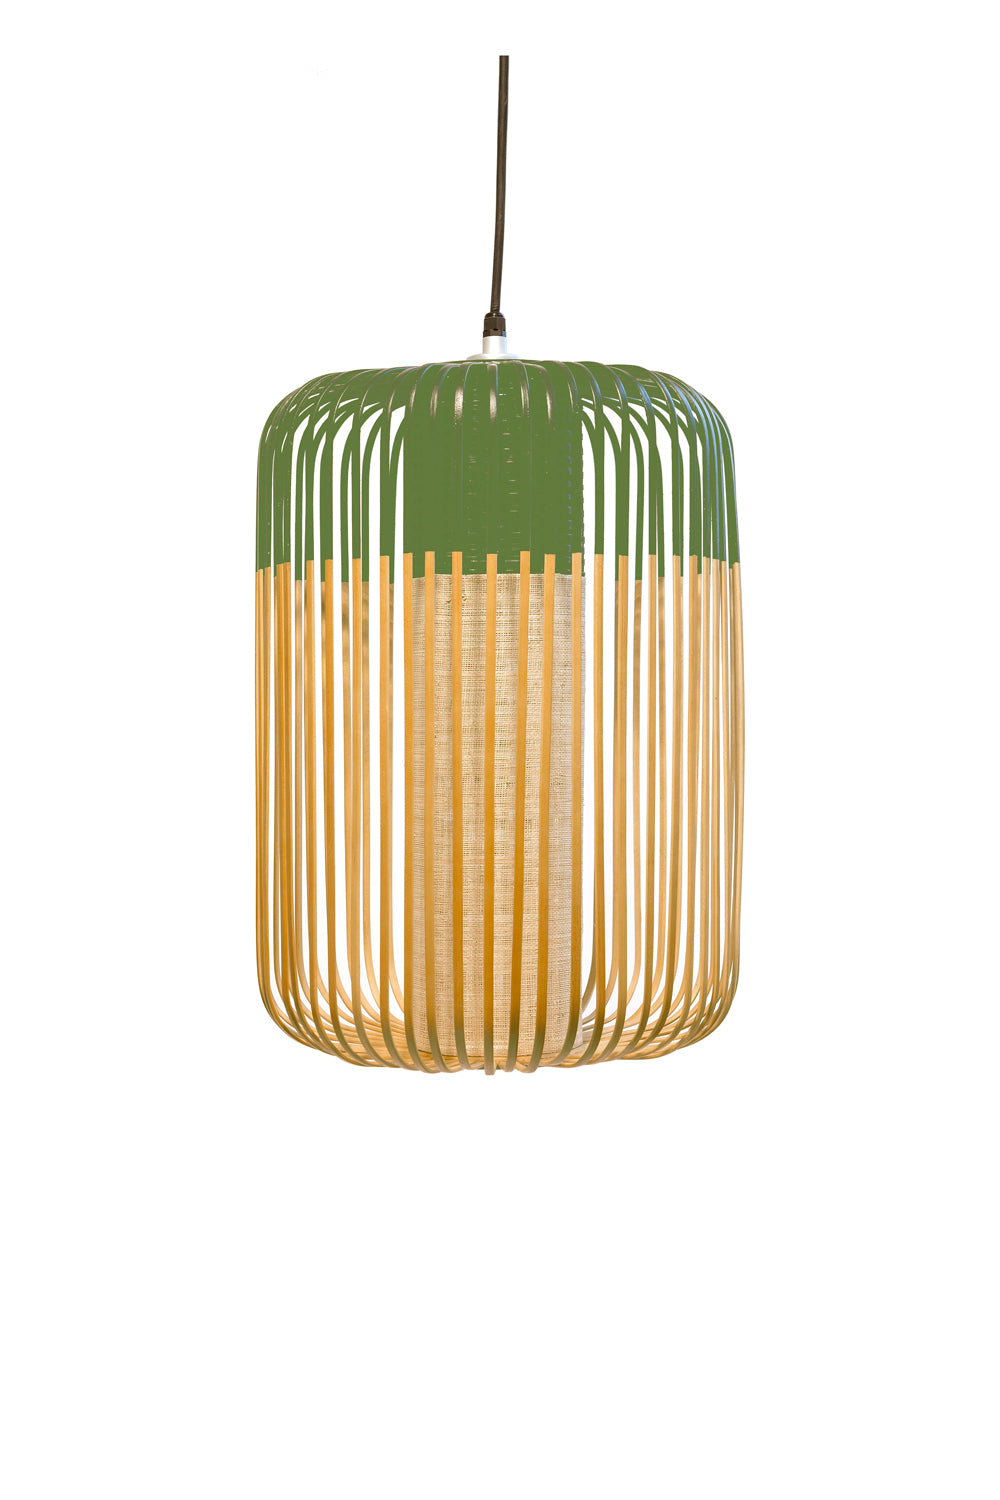 Bamboo Large Pendant Light by Forestier